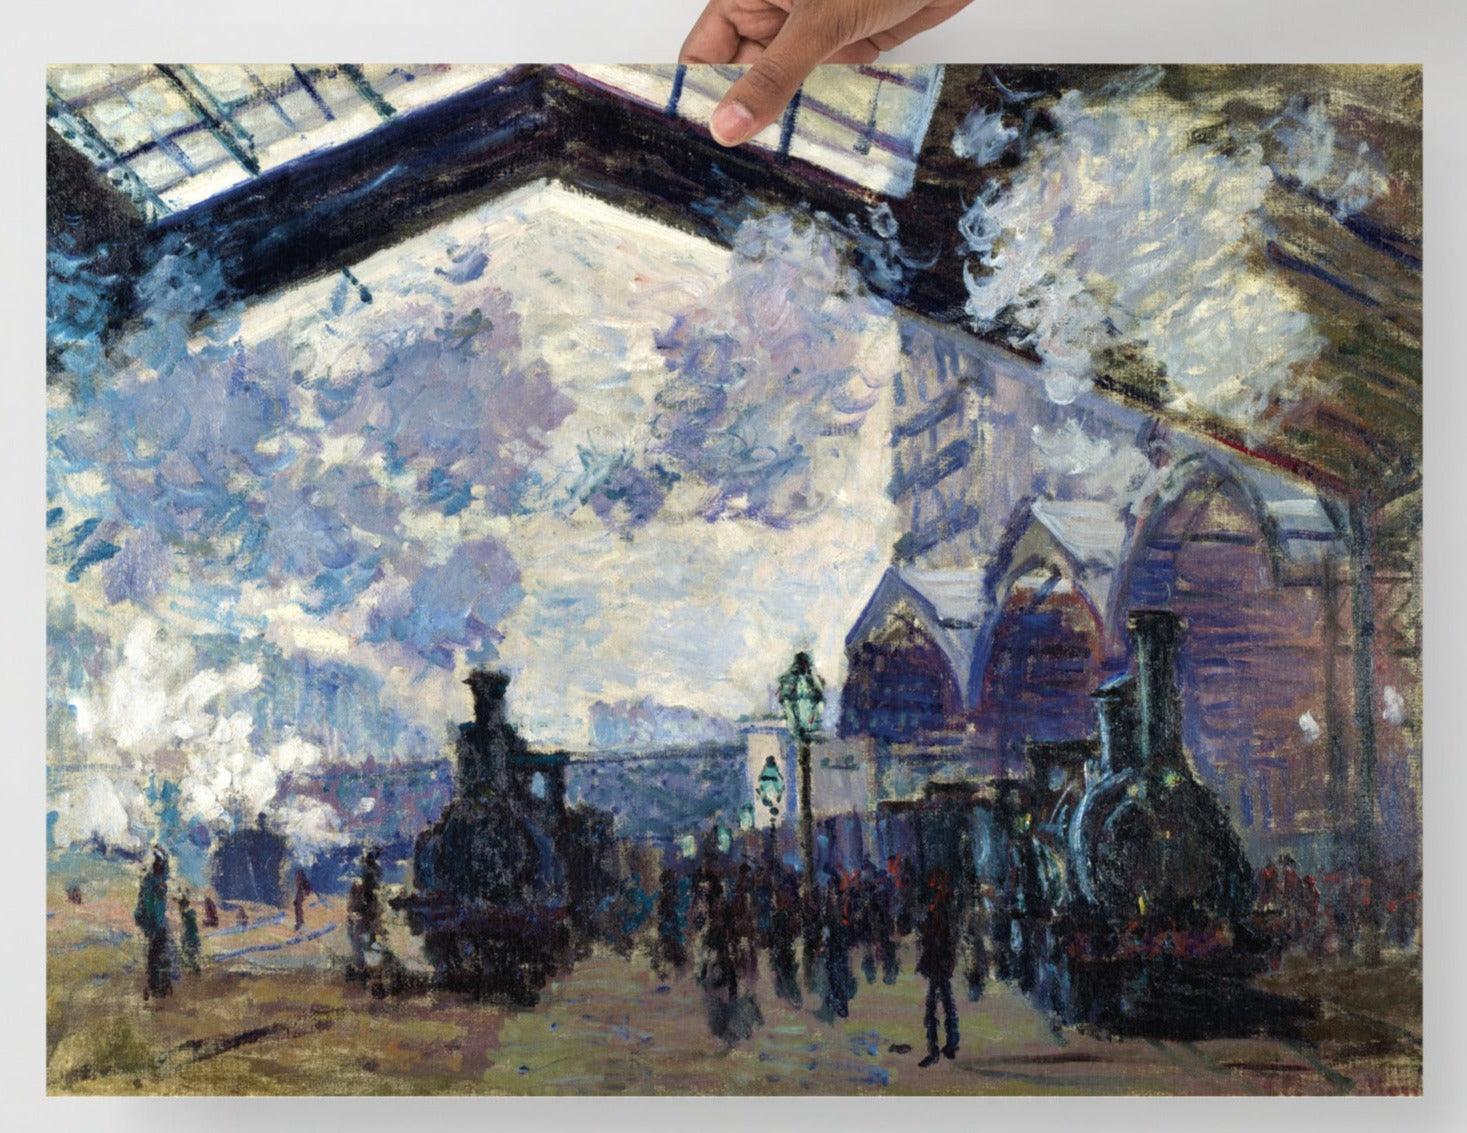 The Gare St-Lazare by Claude Monet  poster on a plain backdrop in size 18x24”.